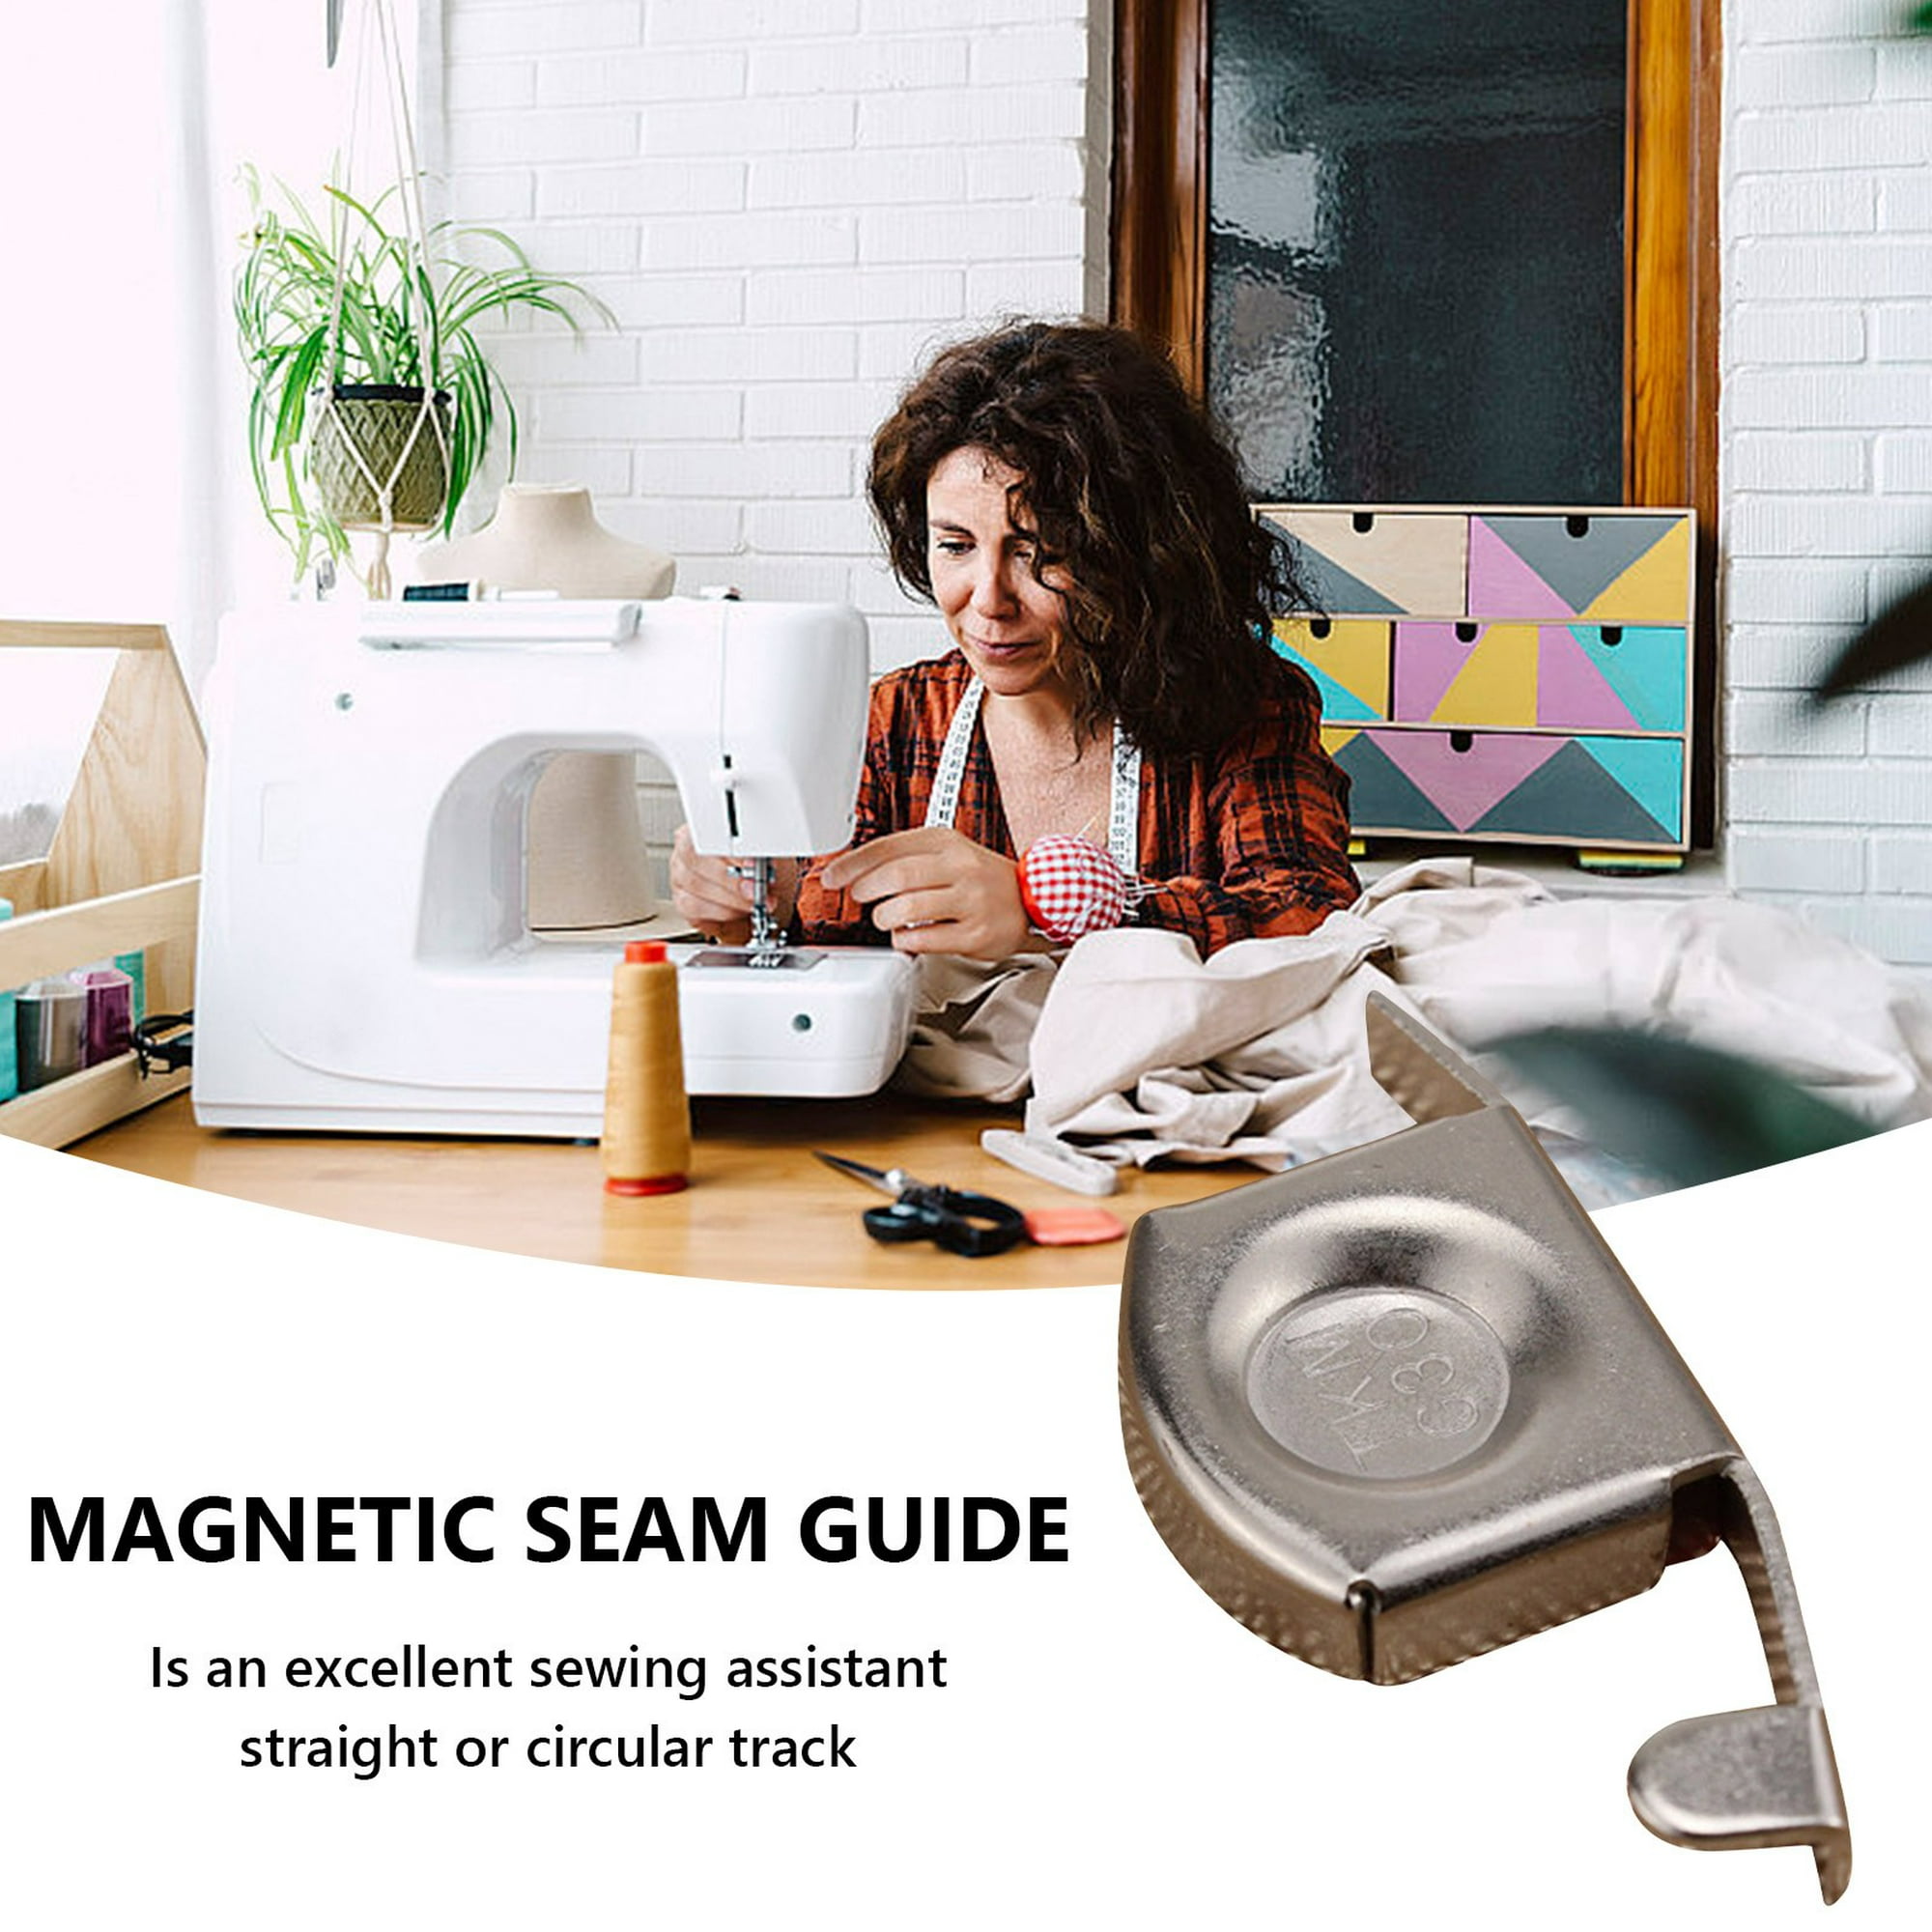 Teissuly Magnetic Seam Guide for Sewing Machine, Sewing Machine